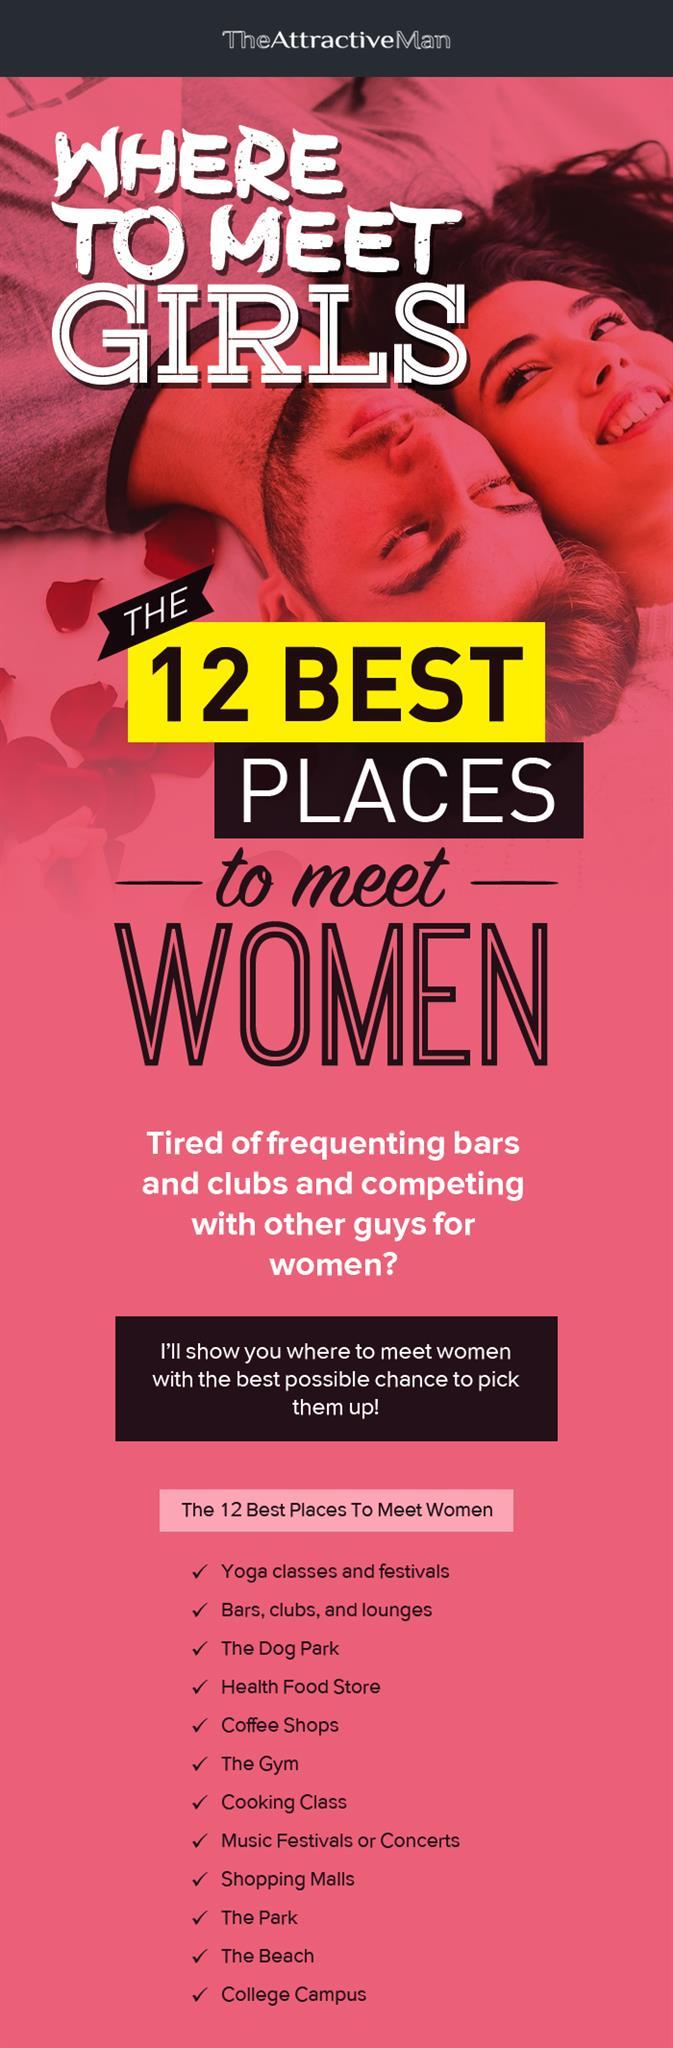 Where to Meet Girls – The 12 Best Places to Meet Women